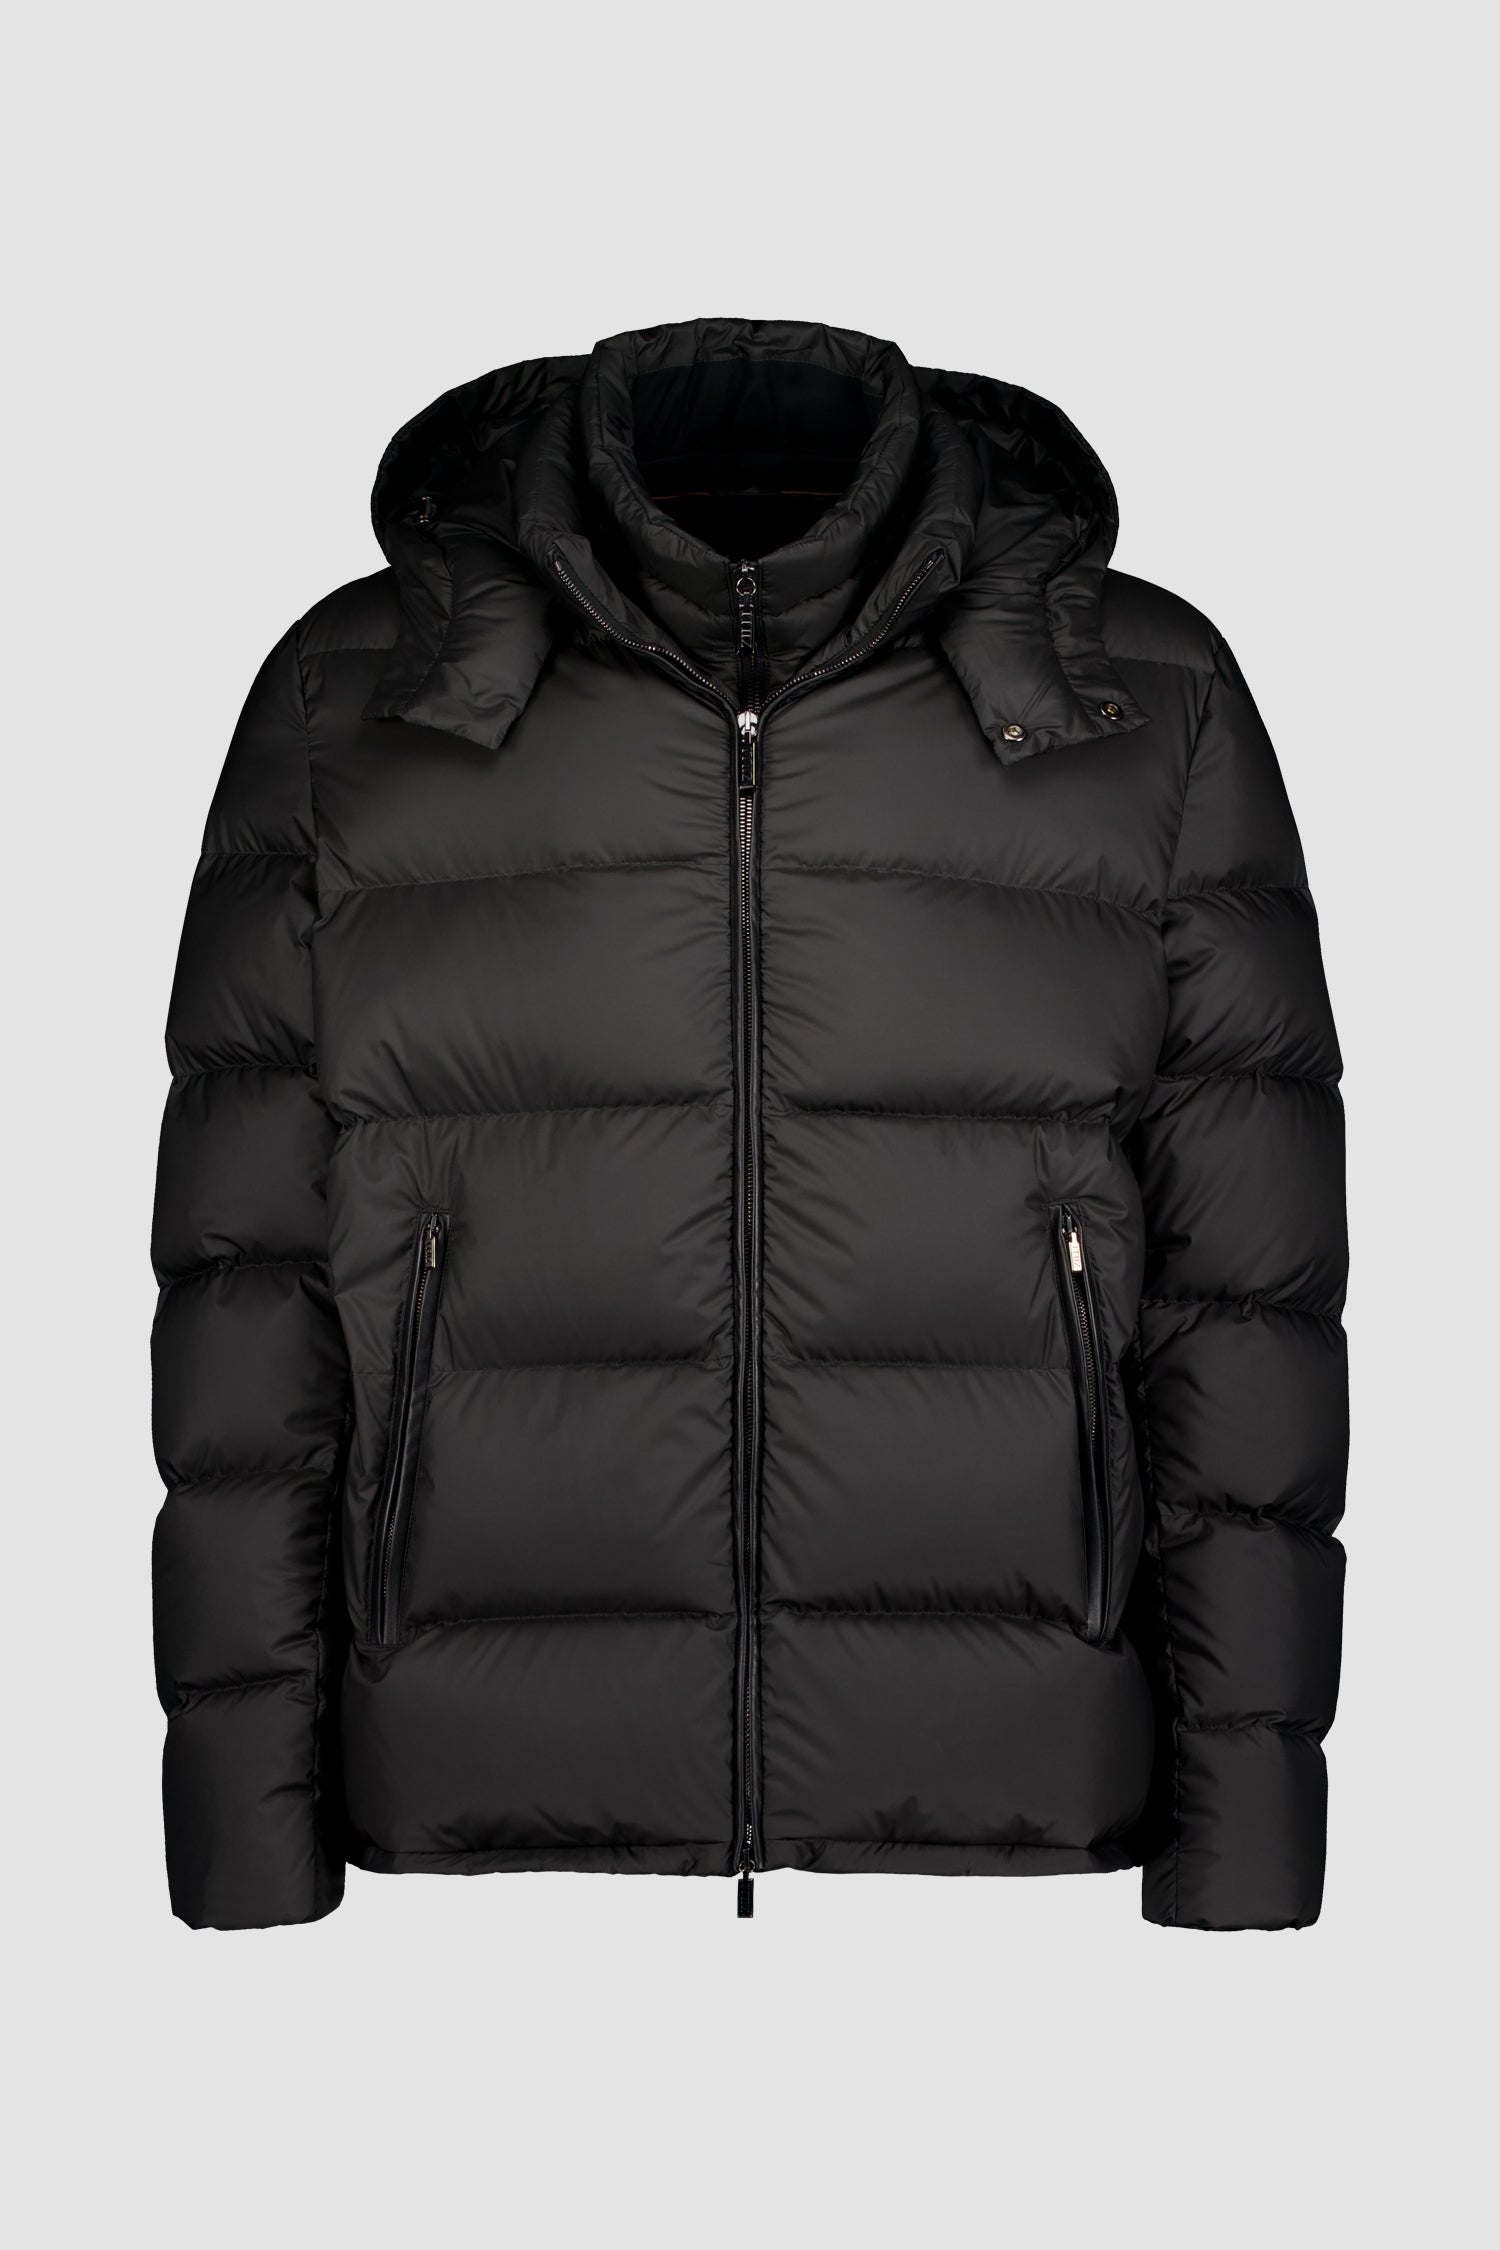 Zilli Black Down Short Jacket with Removable Hood